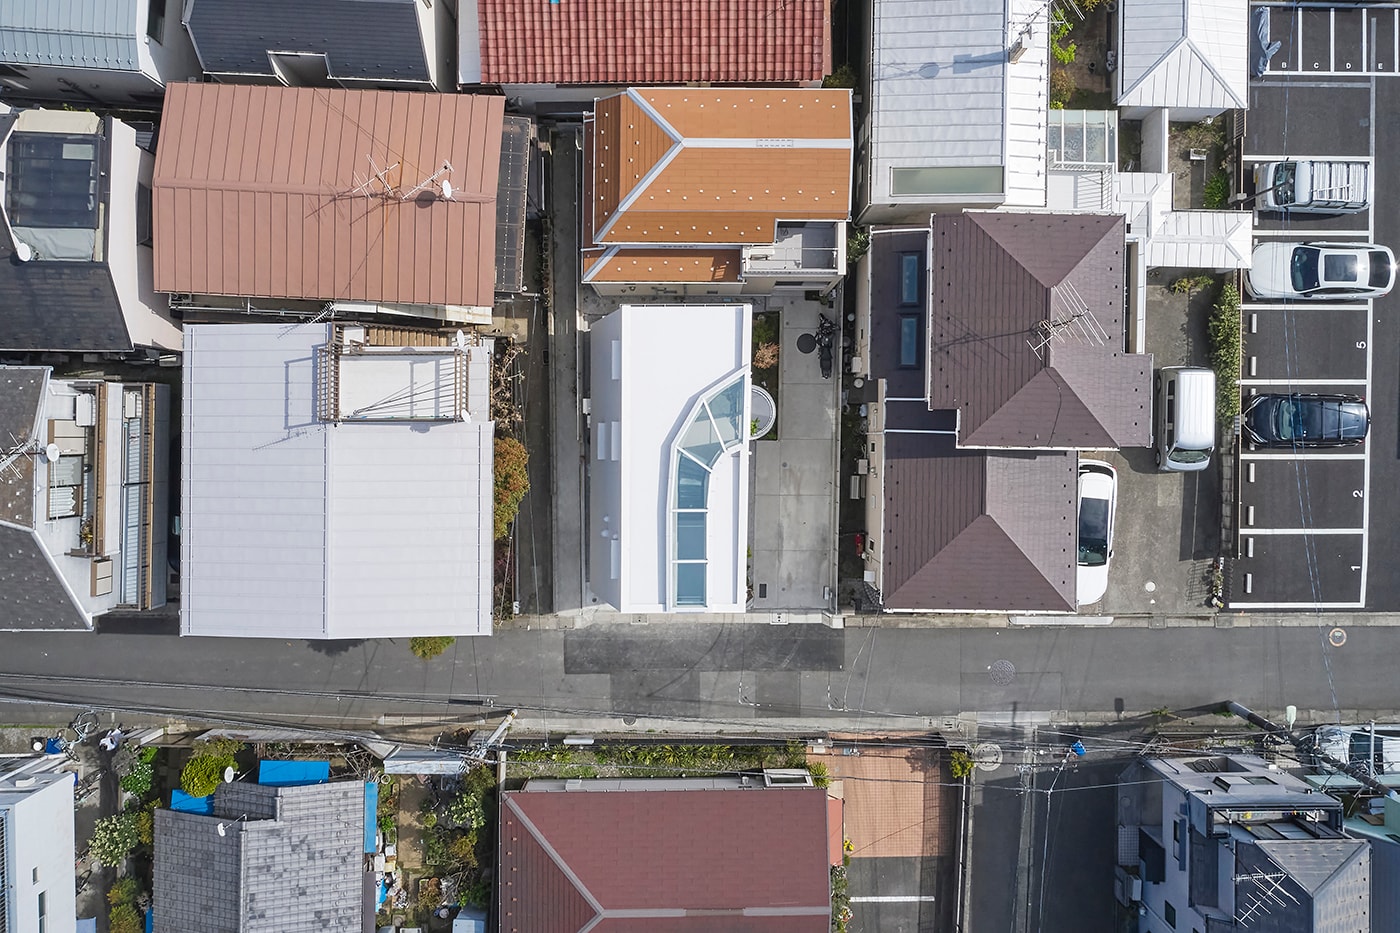 NOT Architects Studio "Scoops Up" Surrounding Scenery for Skinny Tokyo House